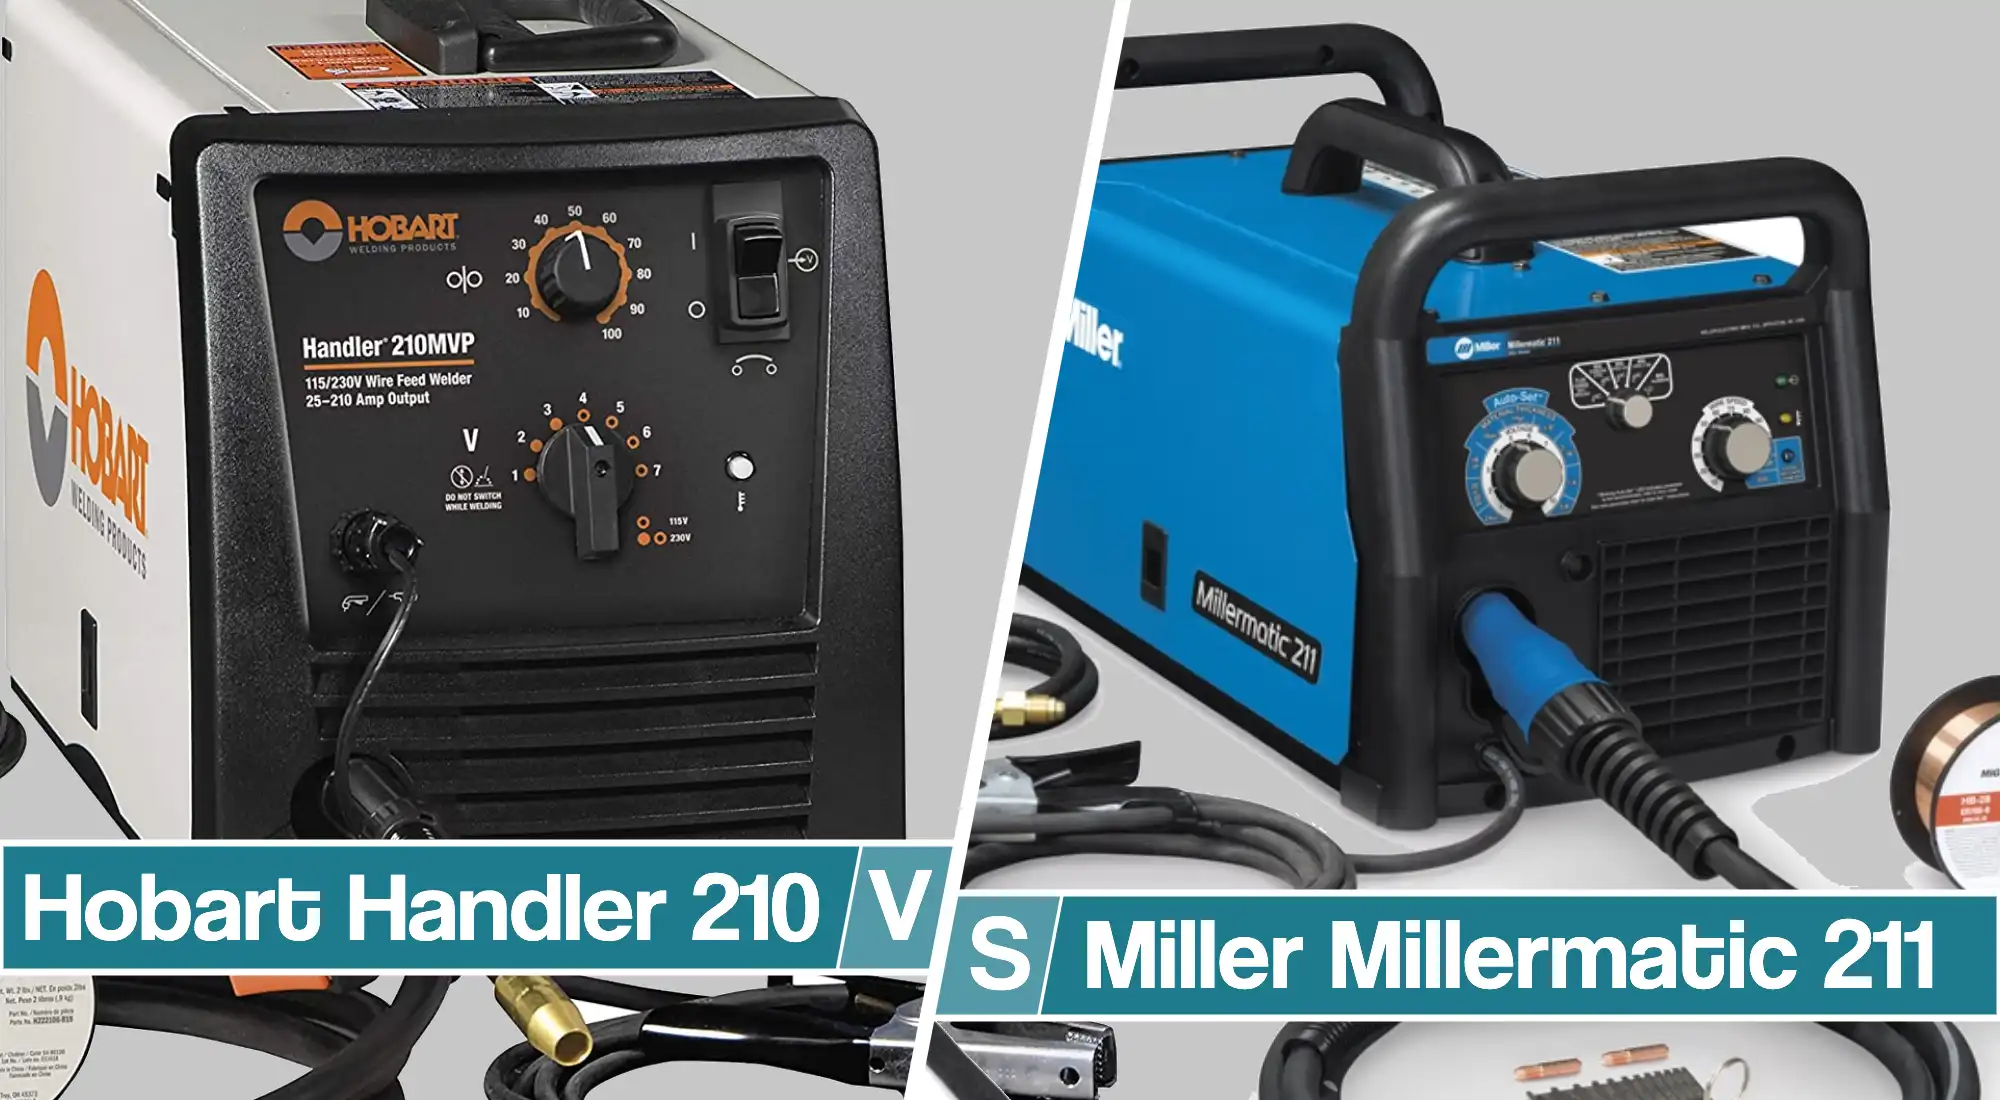 Featured image for the Hobart Handler 210 Vs Miller Millermatic 211 article